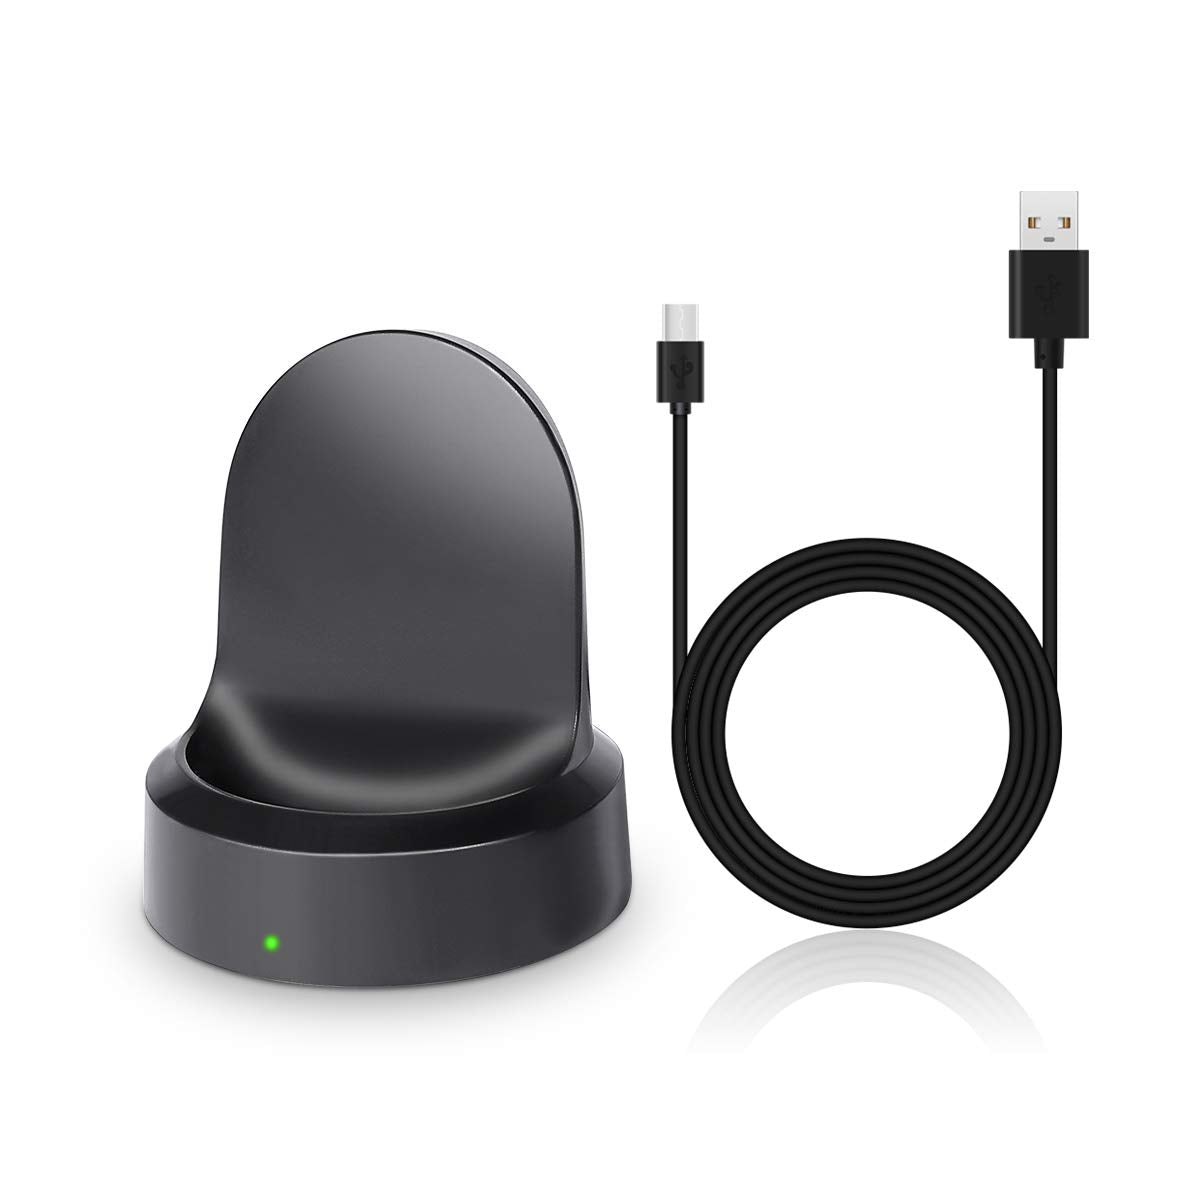 ECellStreet Universal Wireless Charging Magnetic Dock Charger for Samsung Gear S2 S3 Smart Watch